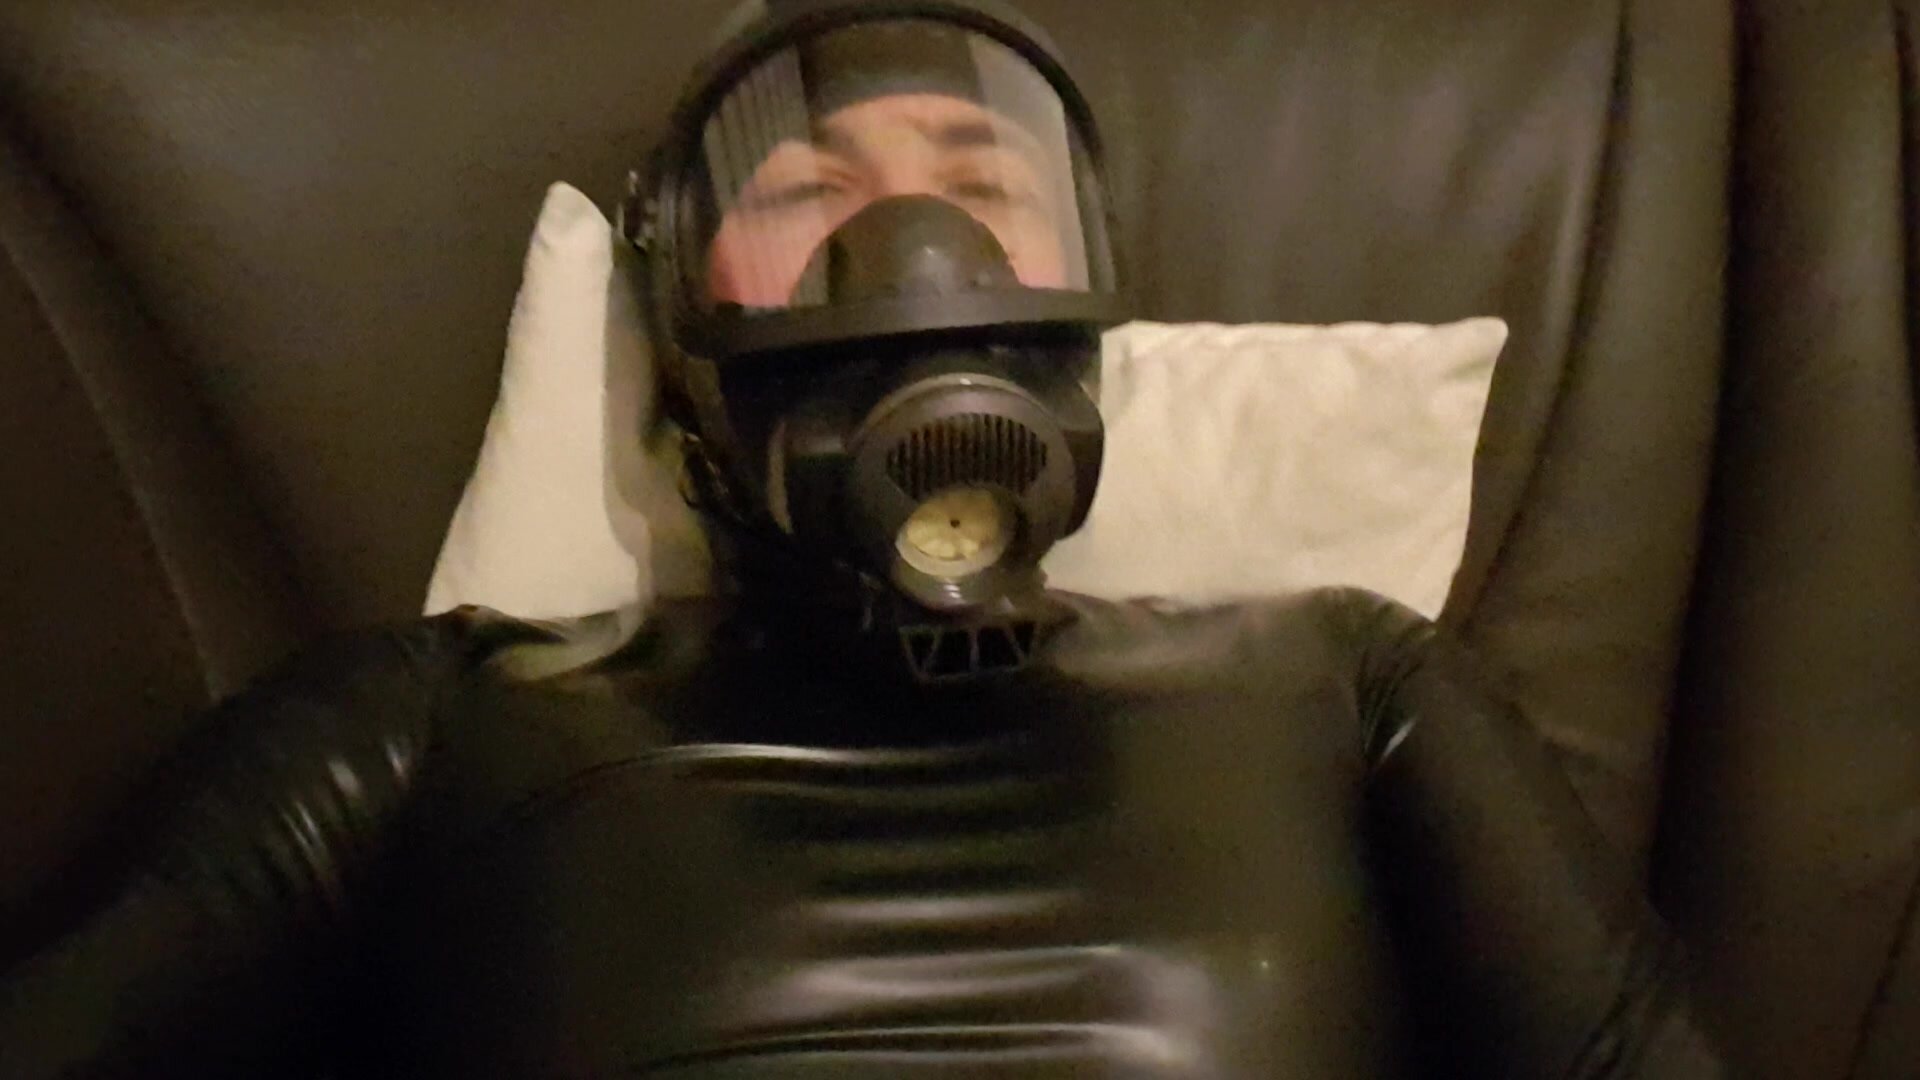 Latexboy enjoy chilling on couch